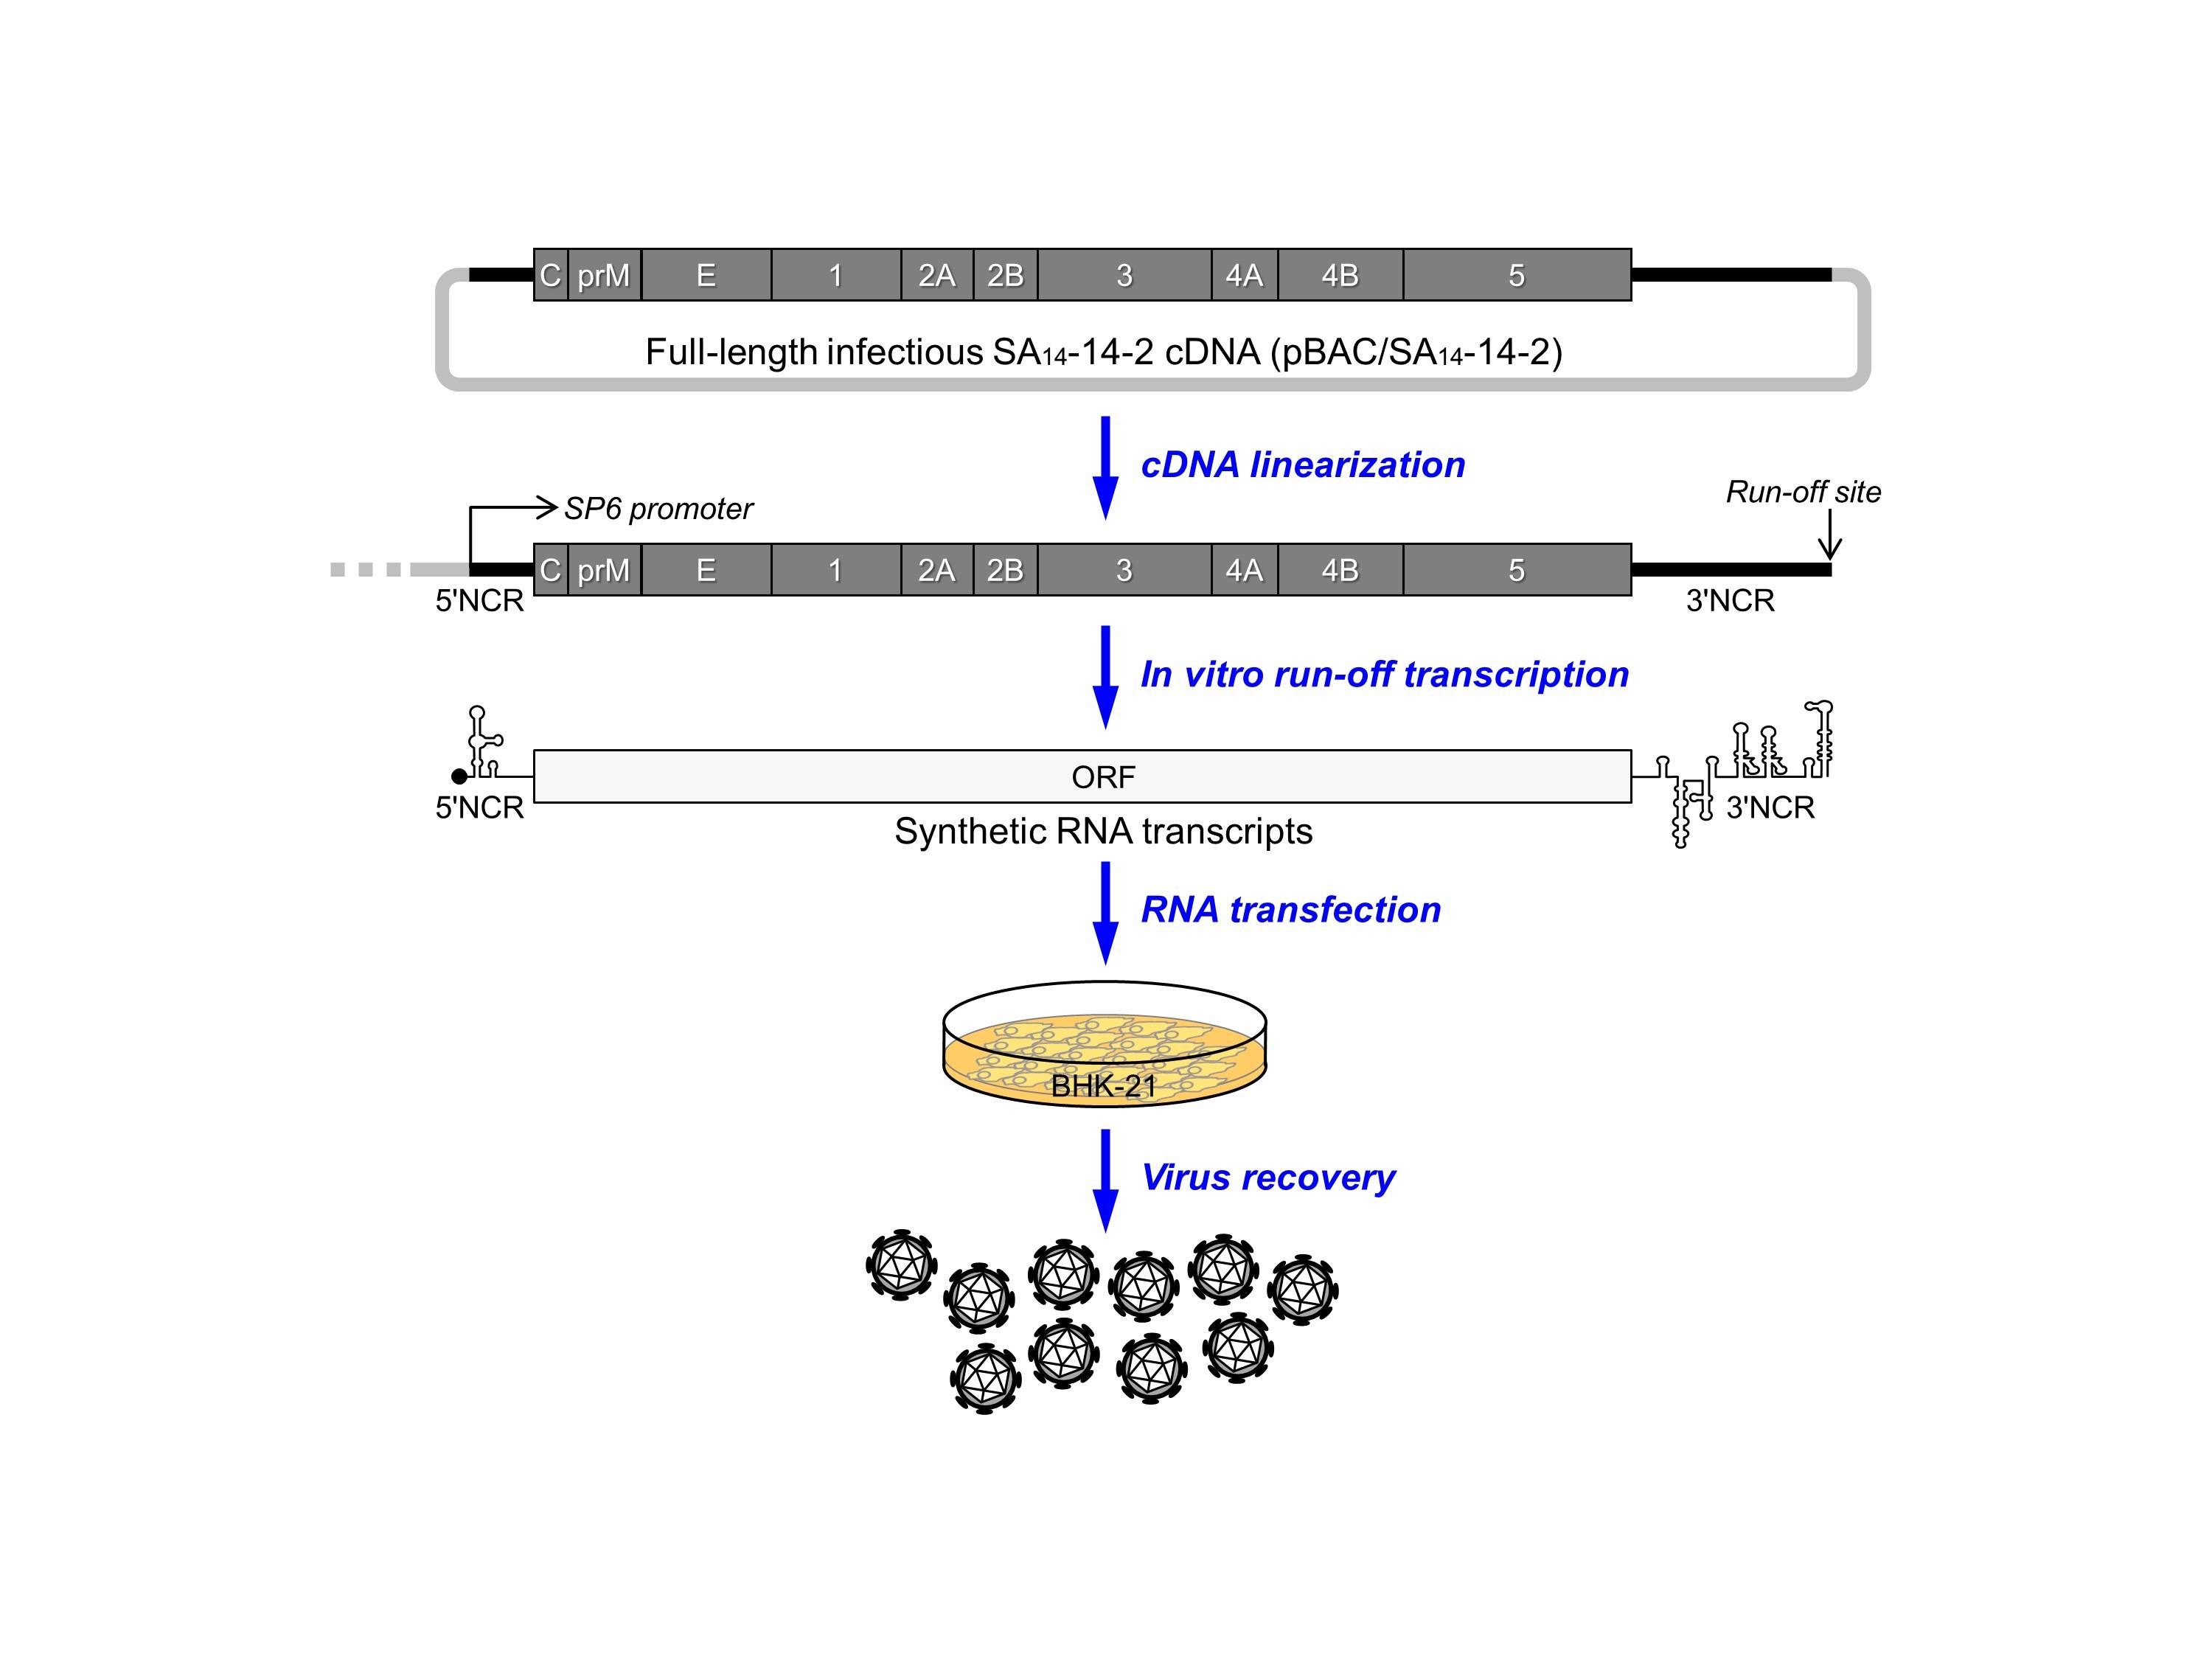 Illustration of a reliable reverse genetics system for SA14-14-2, a live Japanese encephalitis virus (JEV) vaccine that is most commonly used in JEV-endemic areas, by constructing an infectious bacterial artificial chromosome (BAC) that contains the functional full-length SA14-14- 2 cDNA. Using this infectious SA14-14-2 cDNA BAC, combined with a mouse model for JEV infection, we identified a key viral neurovirulence factor, a conserved single amino acid in the ij hairpin adjacent to the fusion loop of the viral E glycoprotein, which regulates viral infectivity into neurons within the central nervous system in vivo and neuronal cells of mouse and human in vitro.